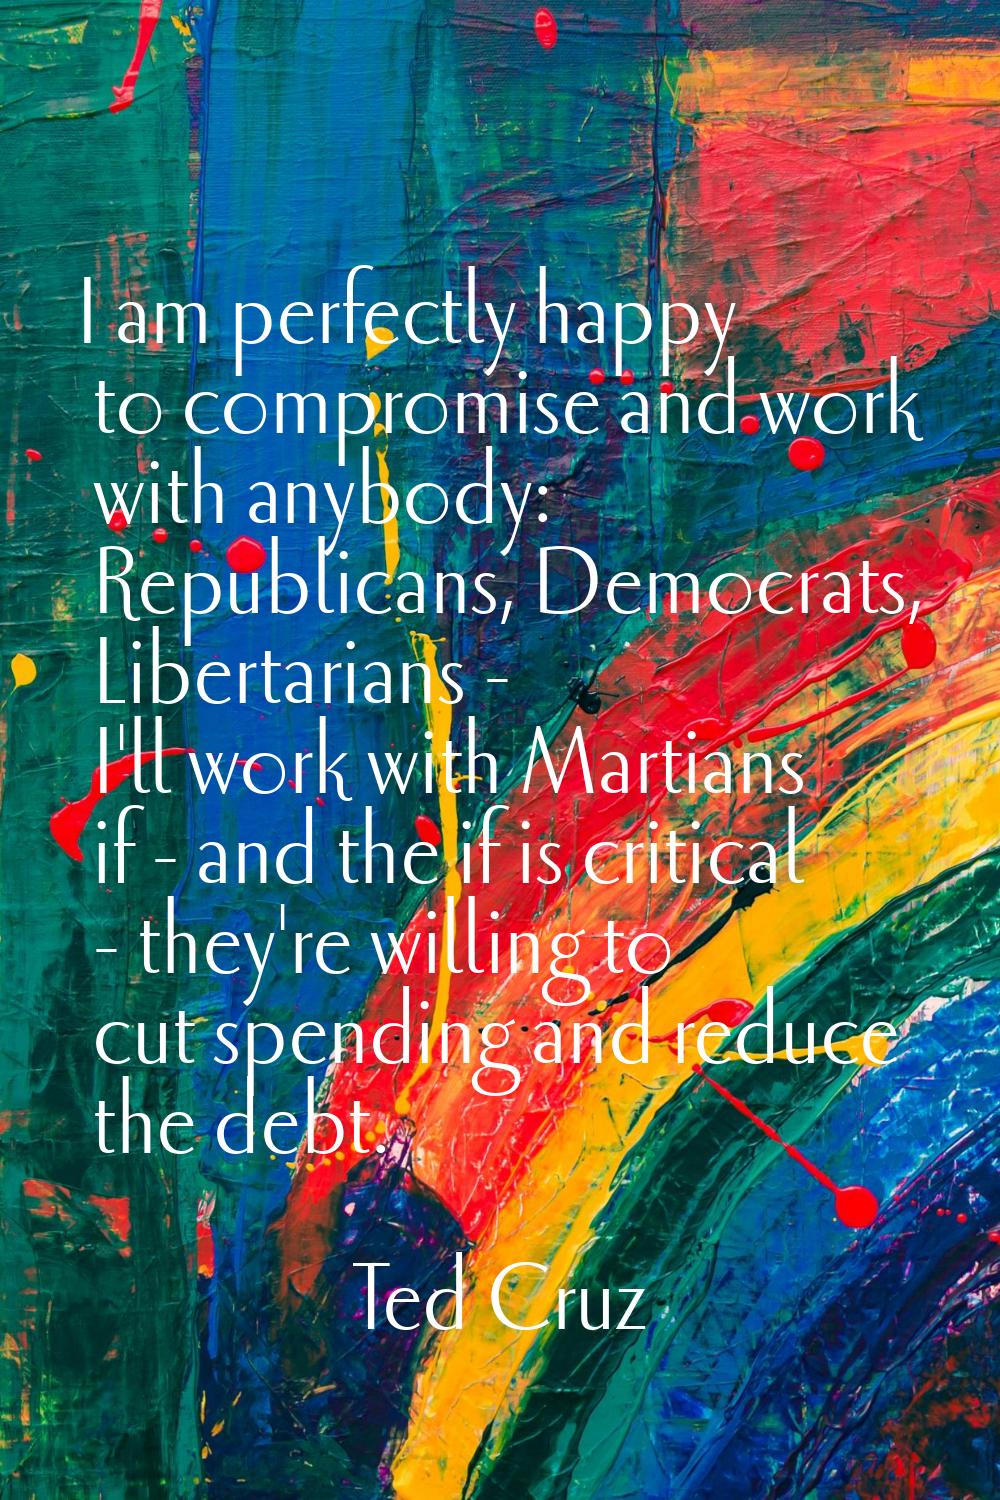 I am perfectly happy to compromise and work with anybody: Republicans, Democrats, Libertarians - I'